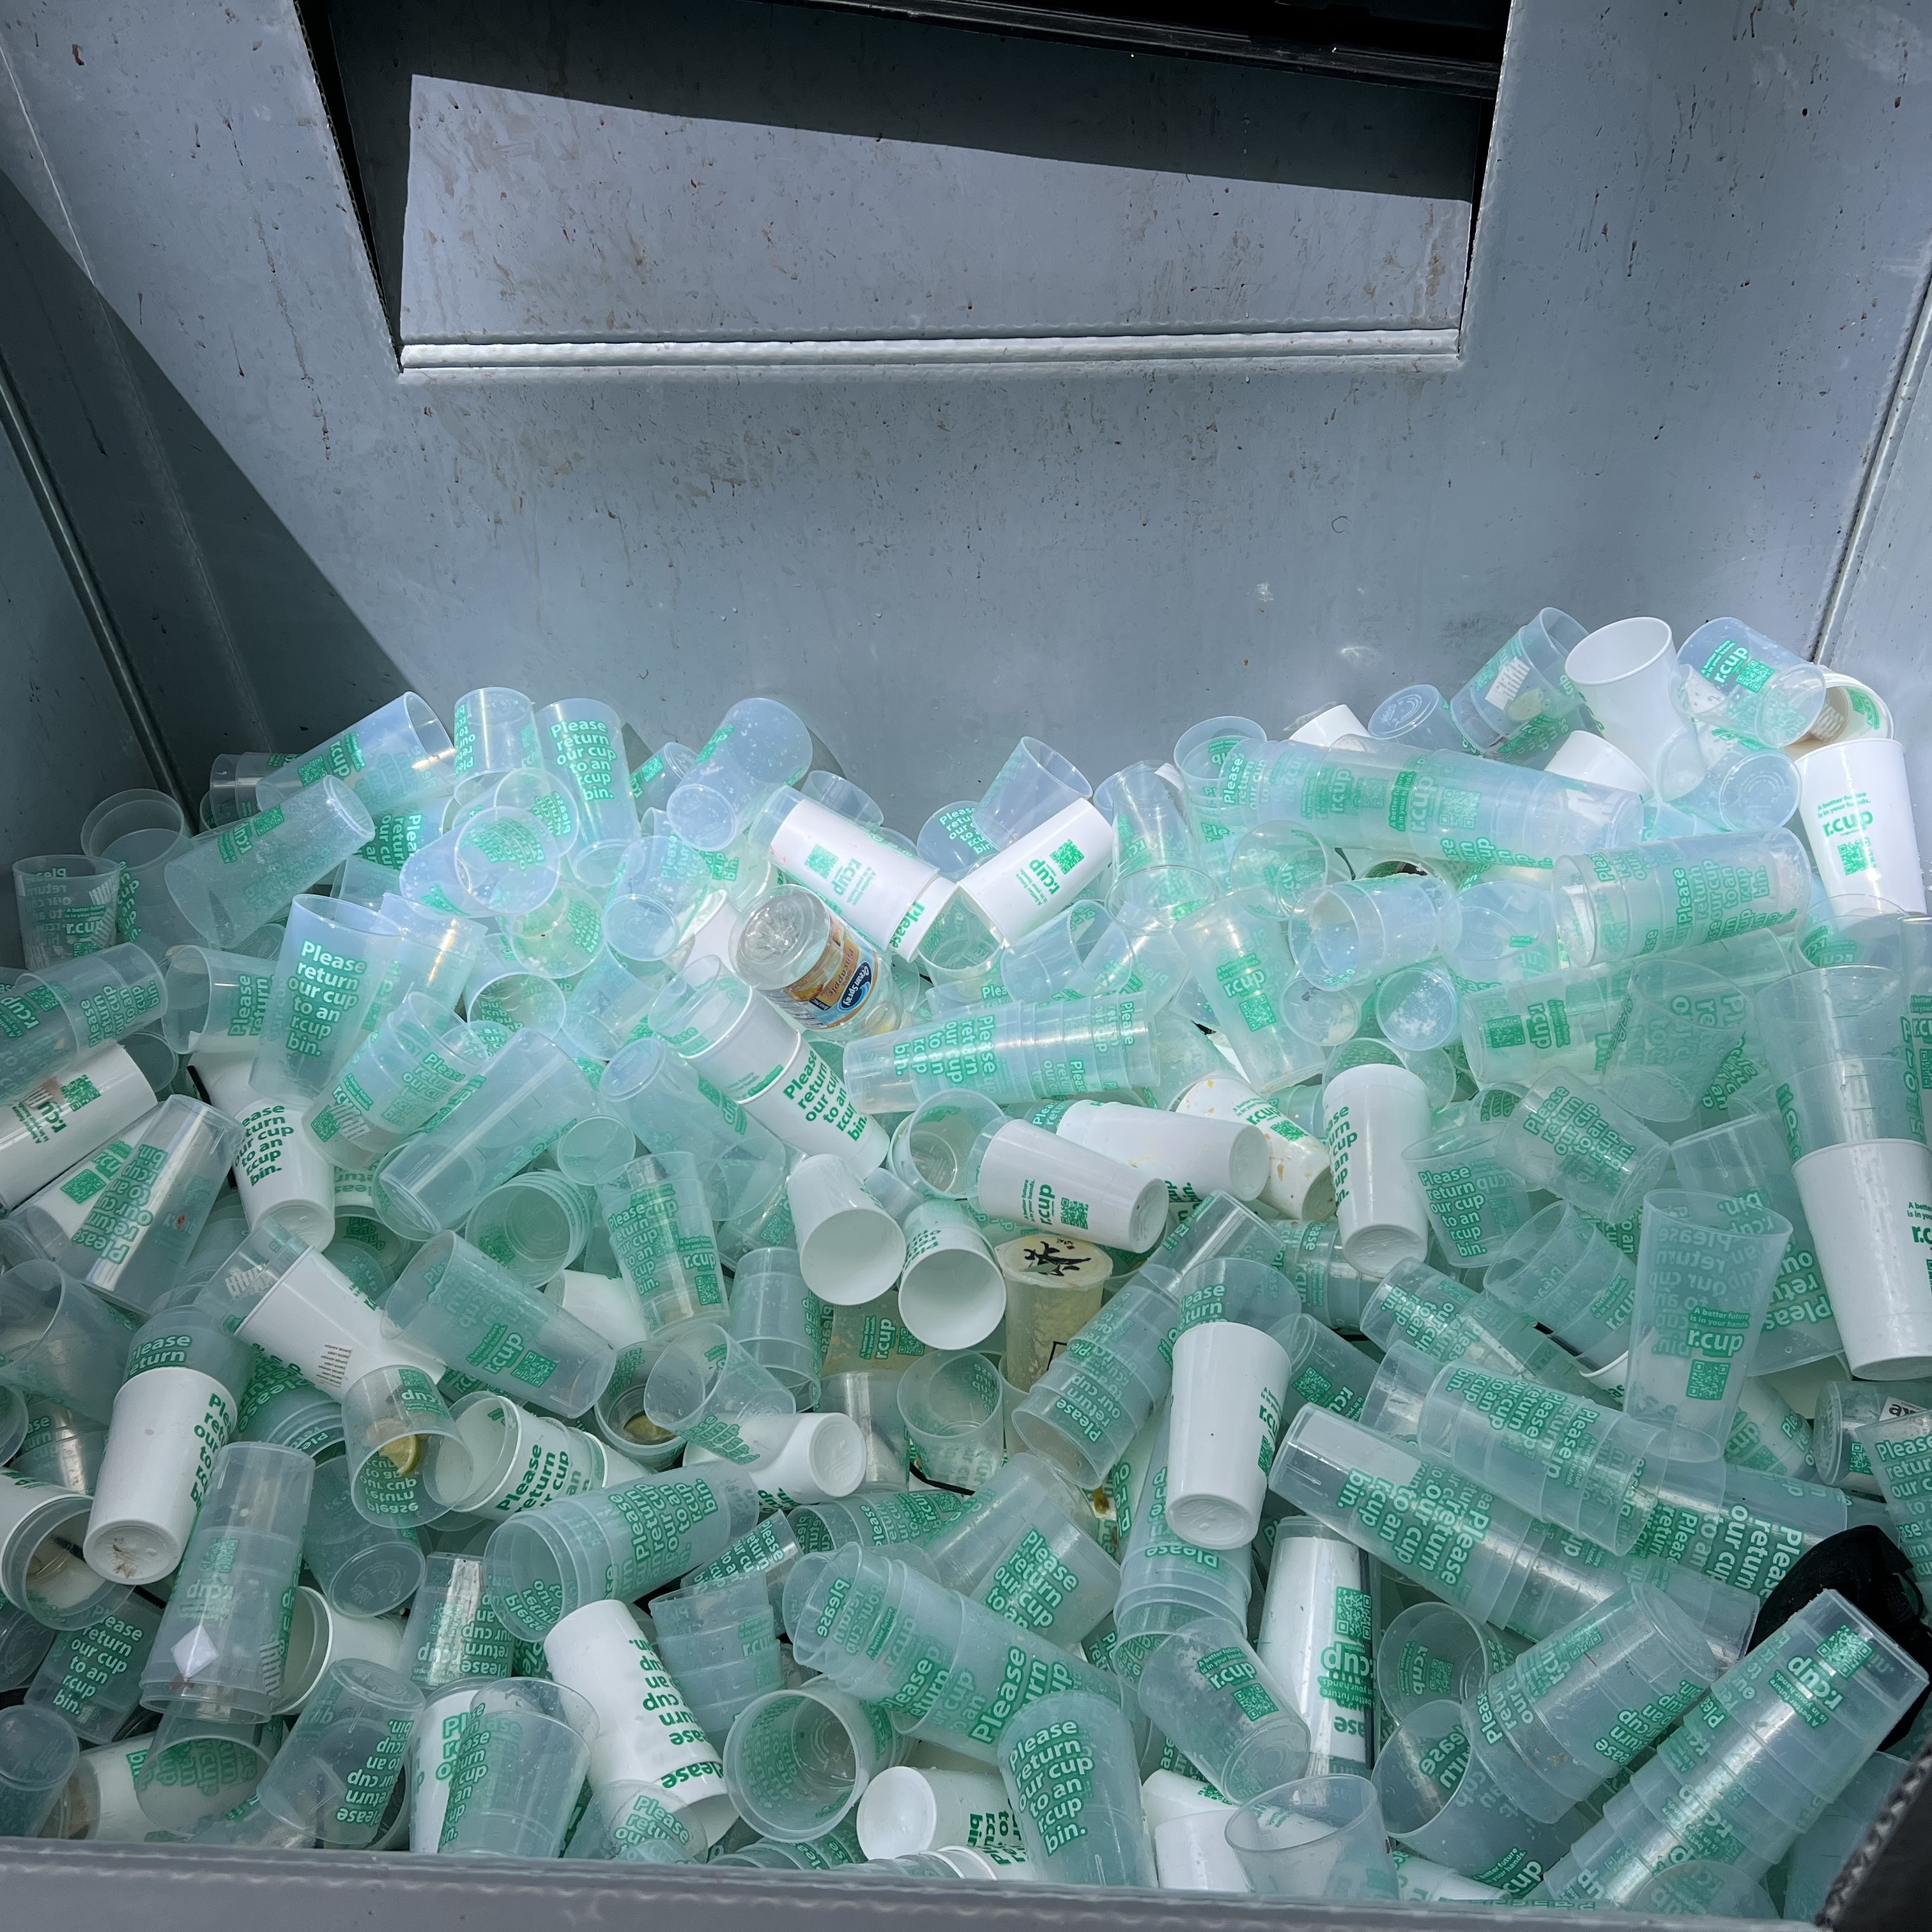 A pile of Reuse cups that have been used in a music venue